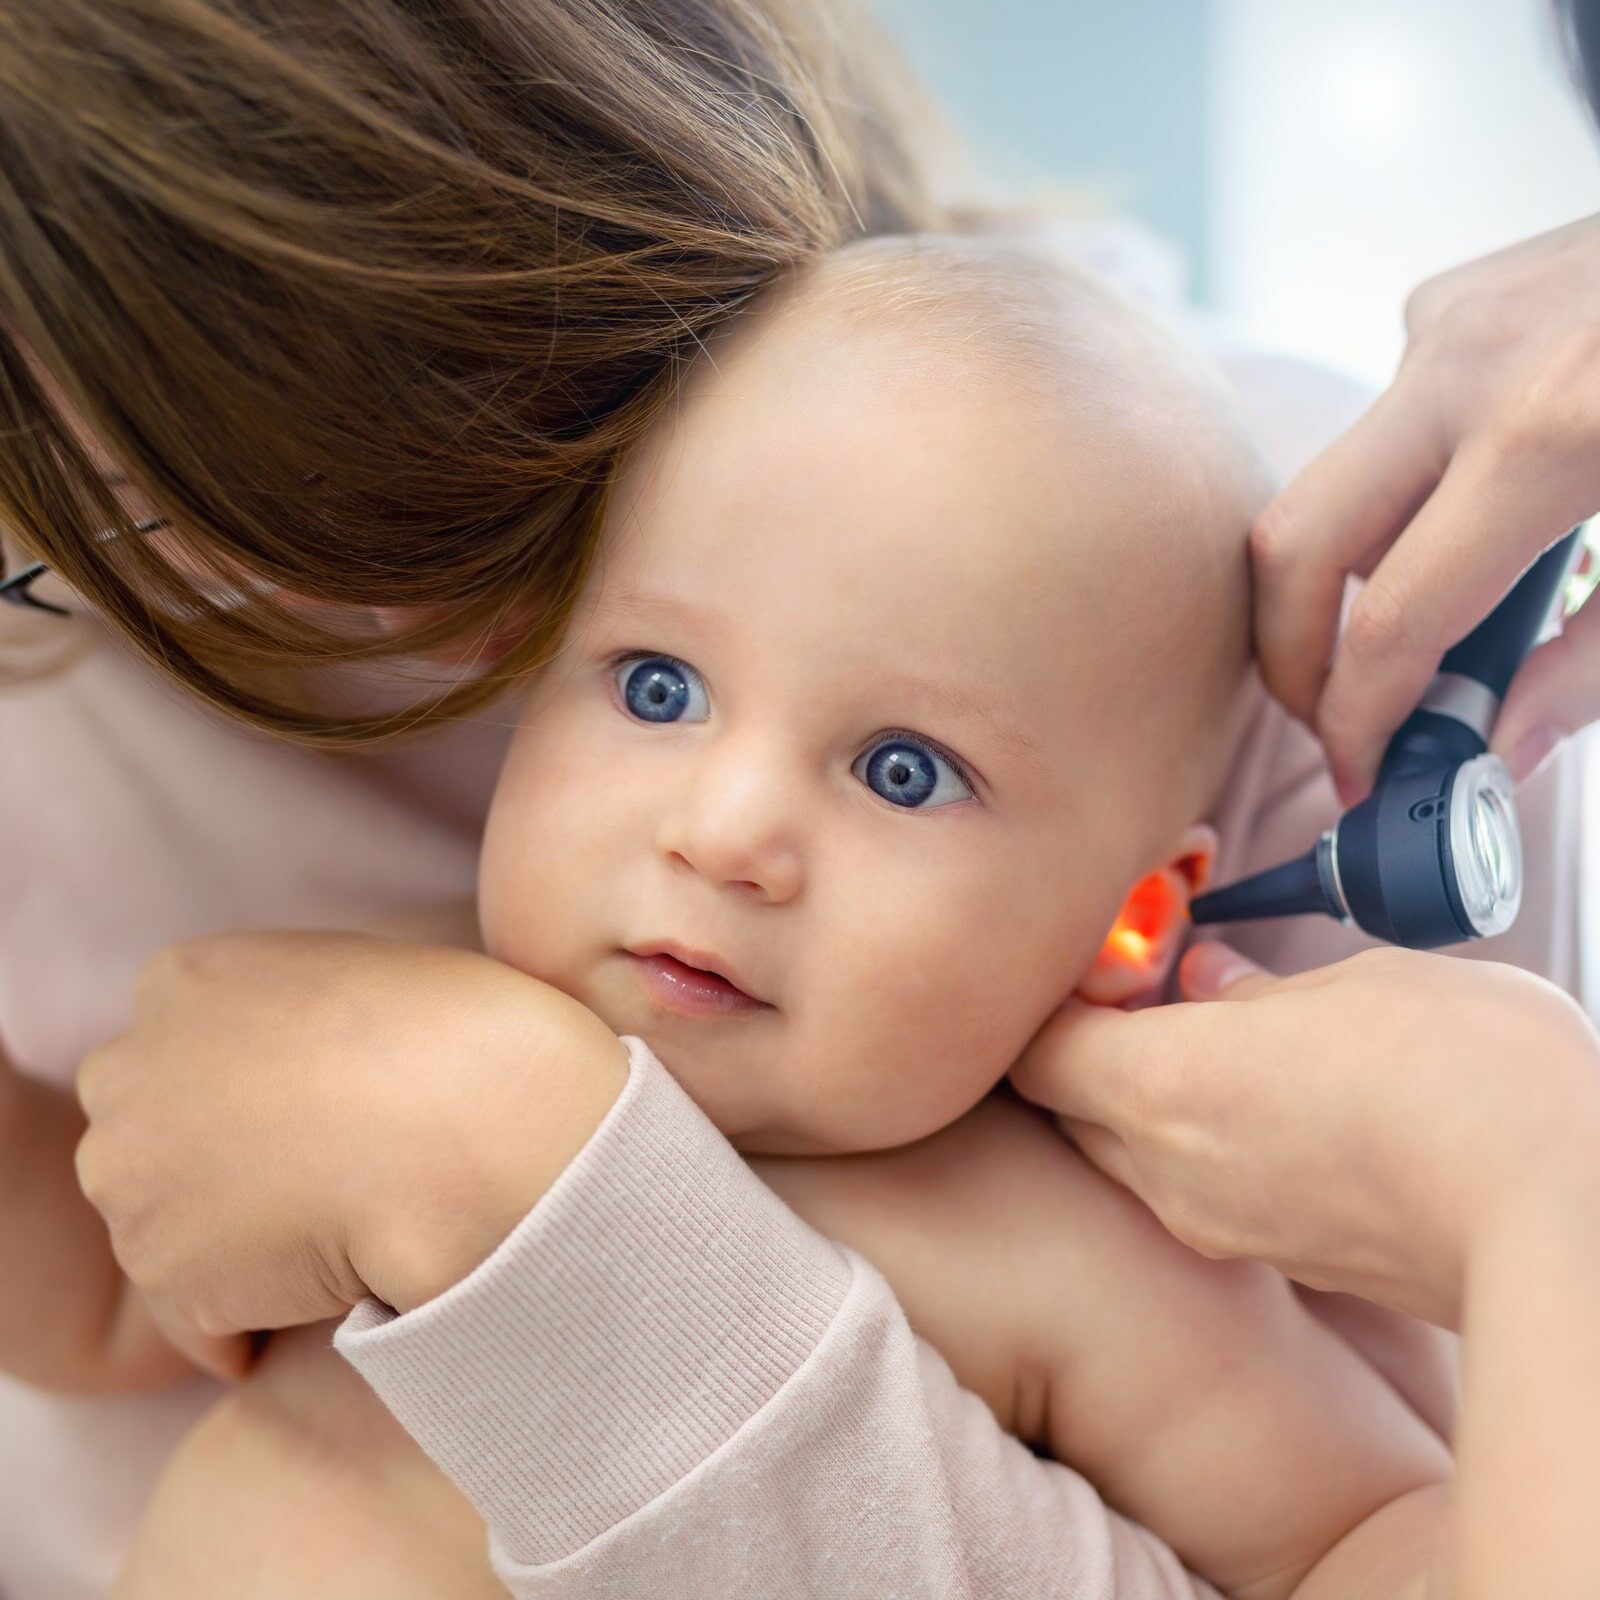 Doctor pediatrist examining childs ear with otoscope. Mom holding baby with hands